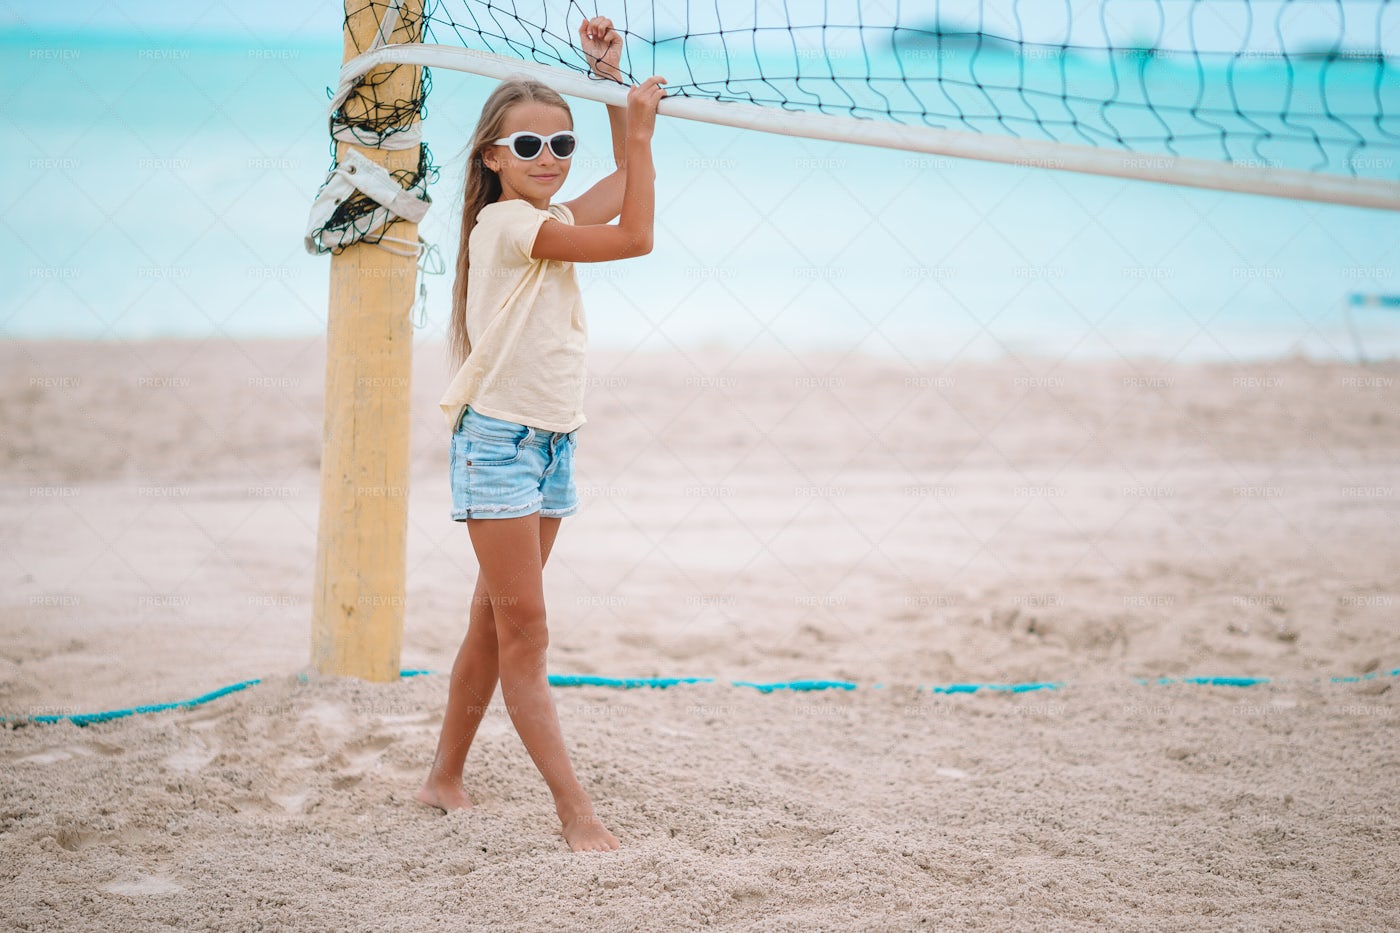 At The Volleyball Net: Stock Photos